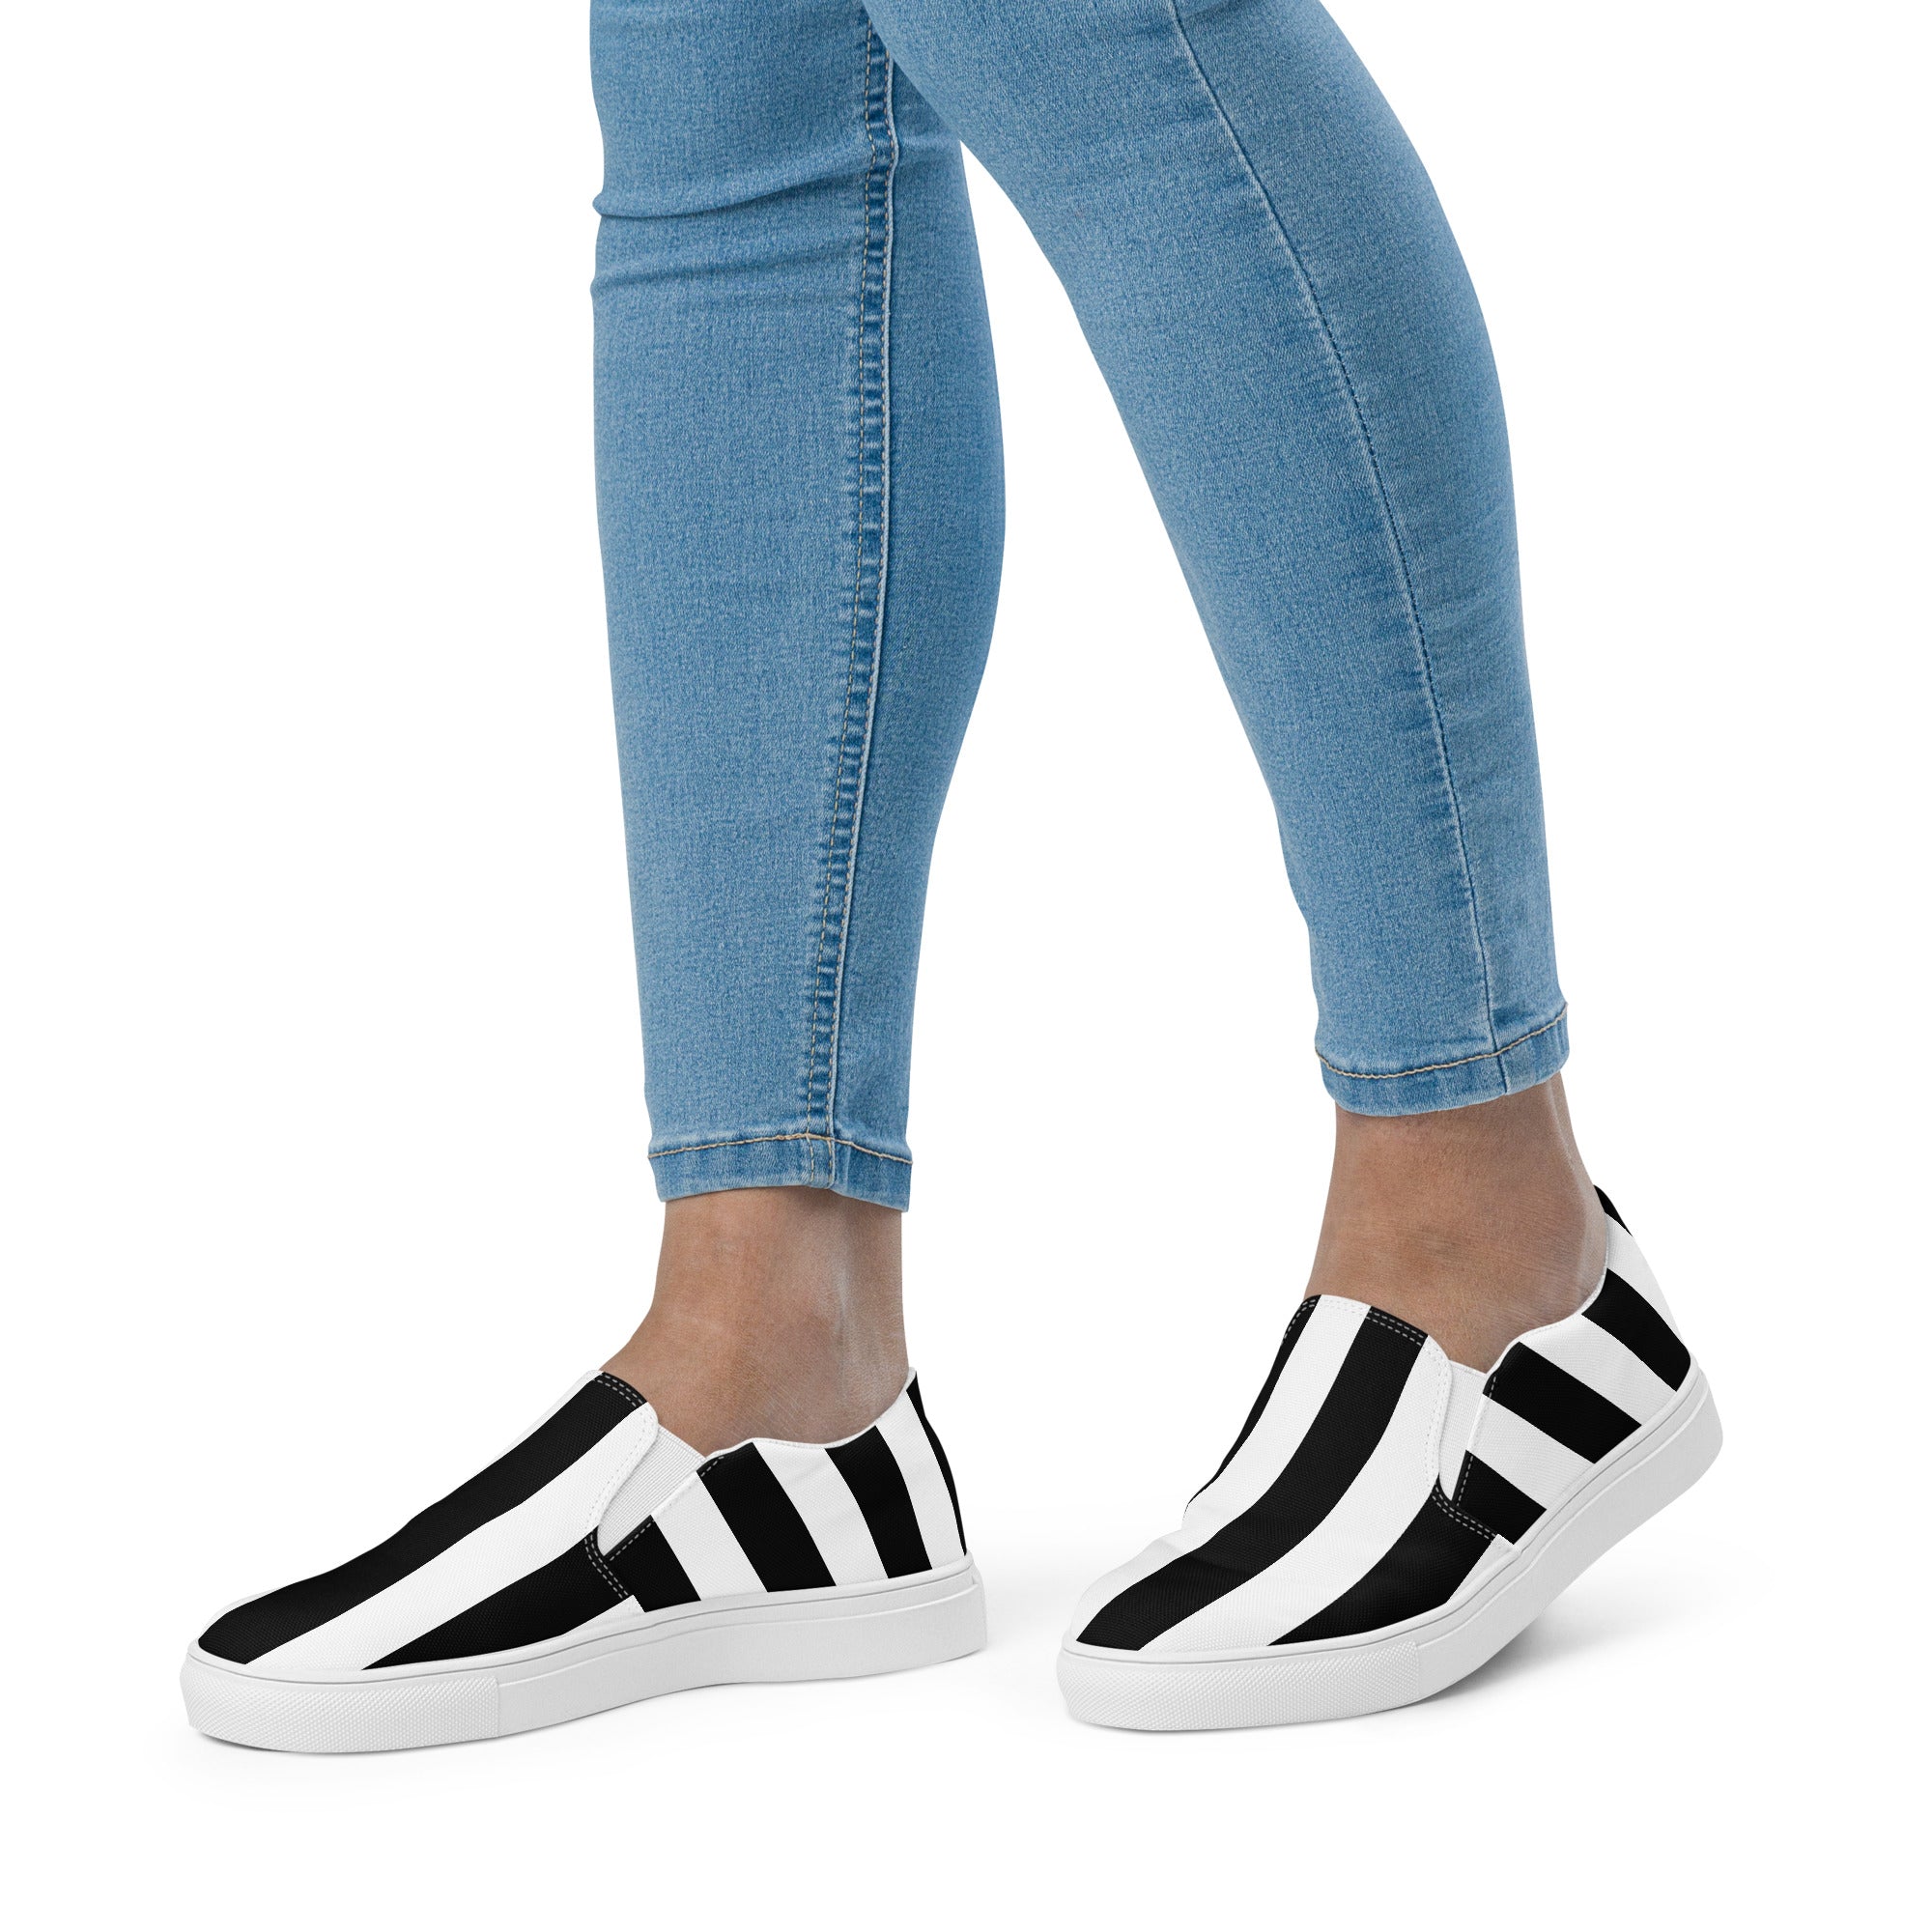 Buy New Black White Striped Canvas Shoes Woman Breathable Skateboarding  Students Sneakers Leisure Tenis Feminino Flat Shoes from Quanzhou Luojiang  District Baitao Trading Co., Ltd., China | Tradewheel.com